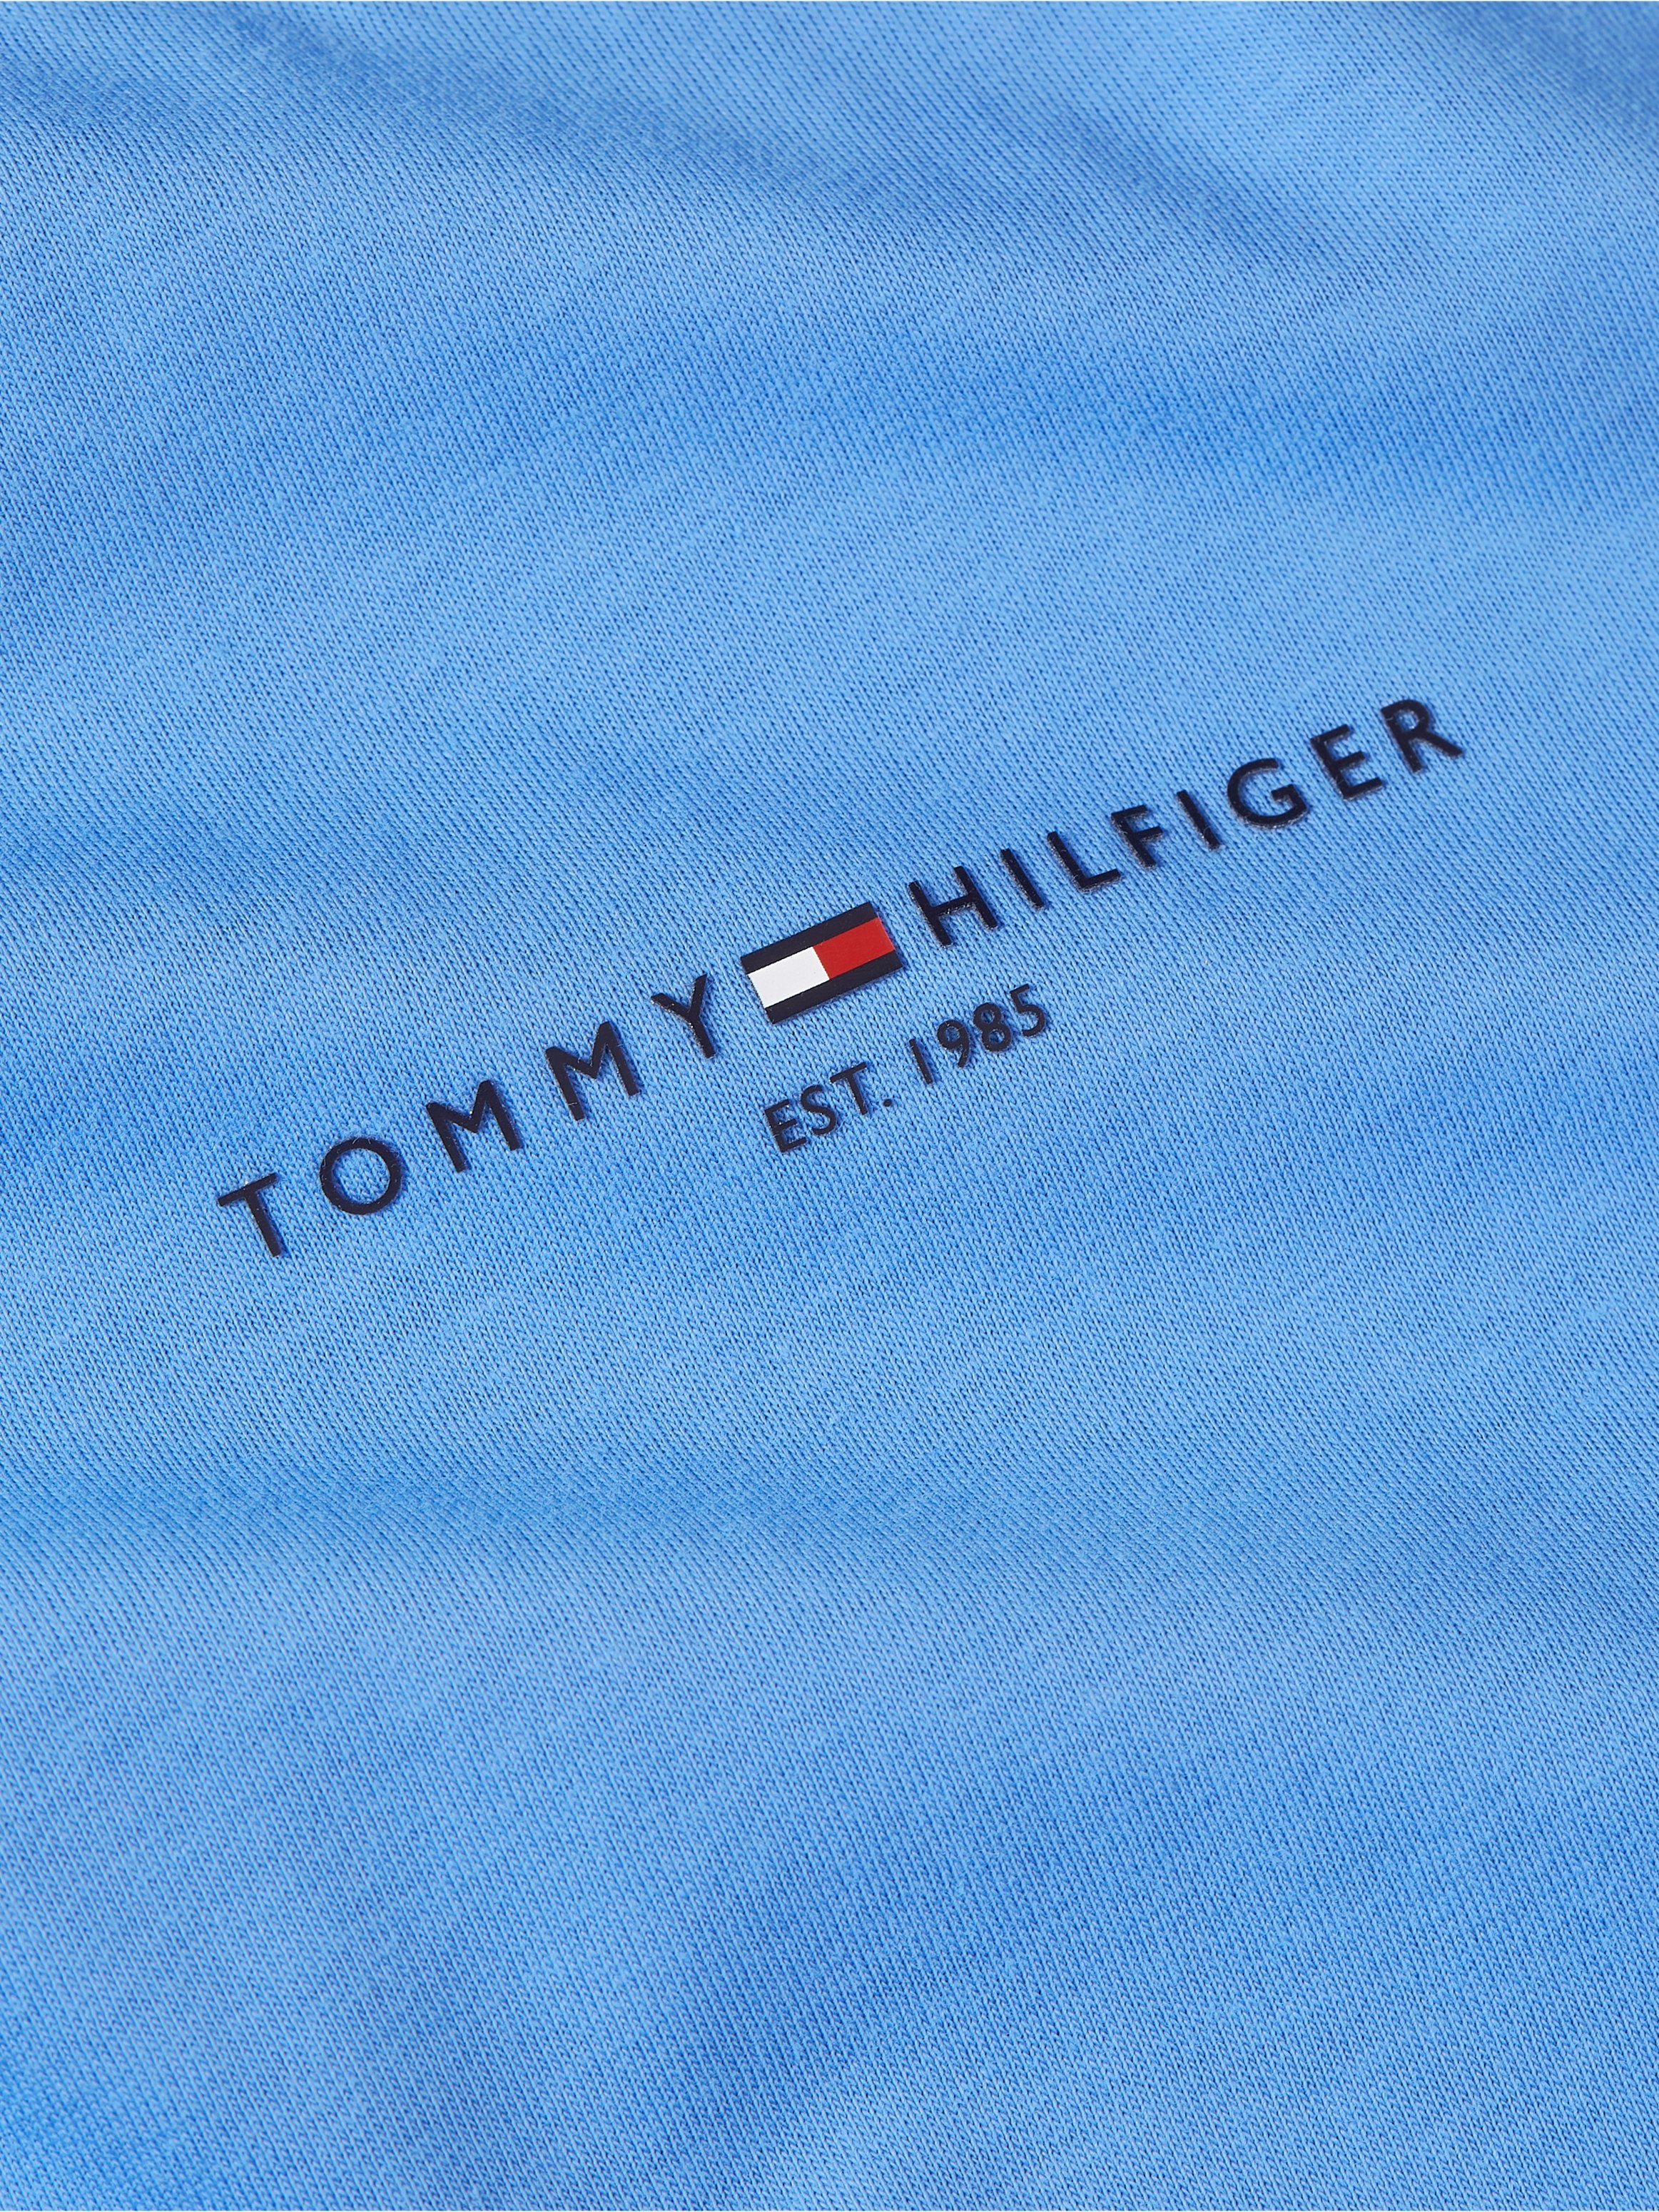 LOGO spell Hilfiger TEE T-Shirt TIPPED Tommy TOMMY blue